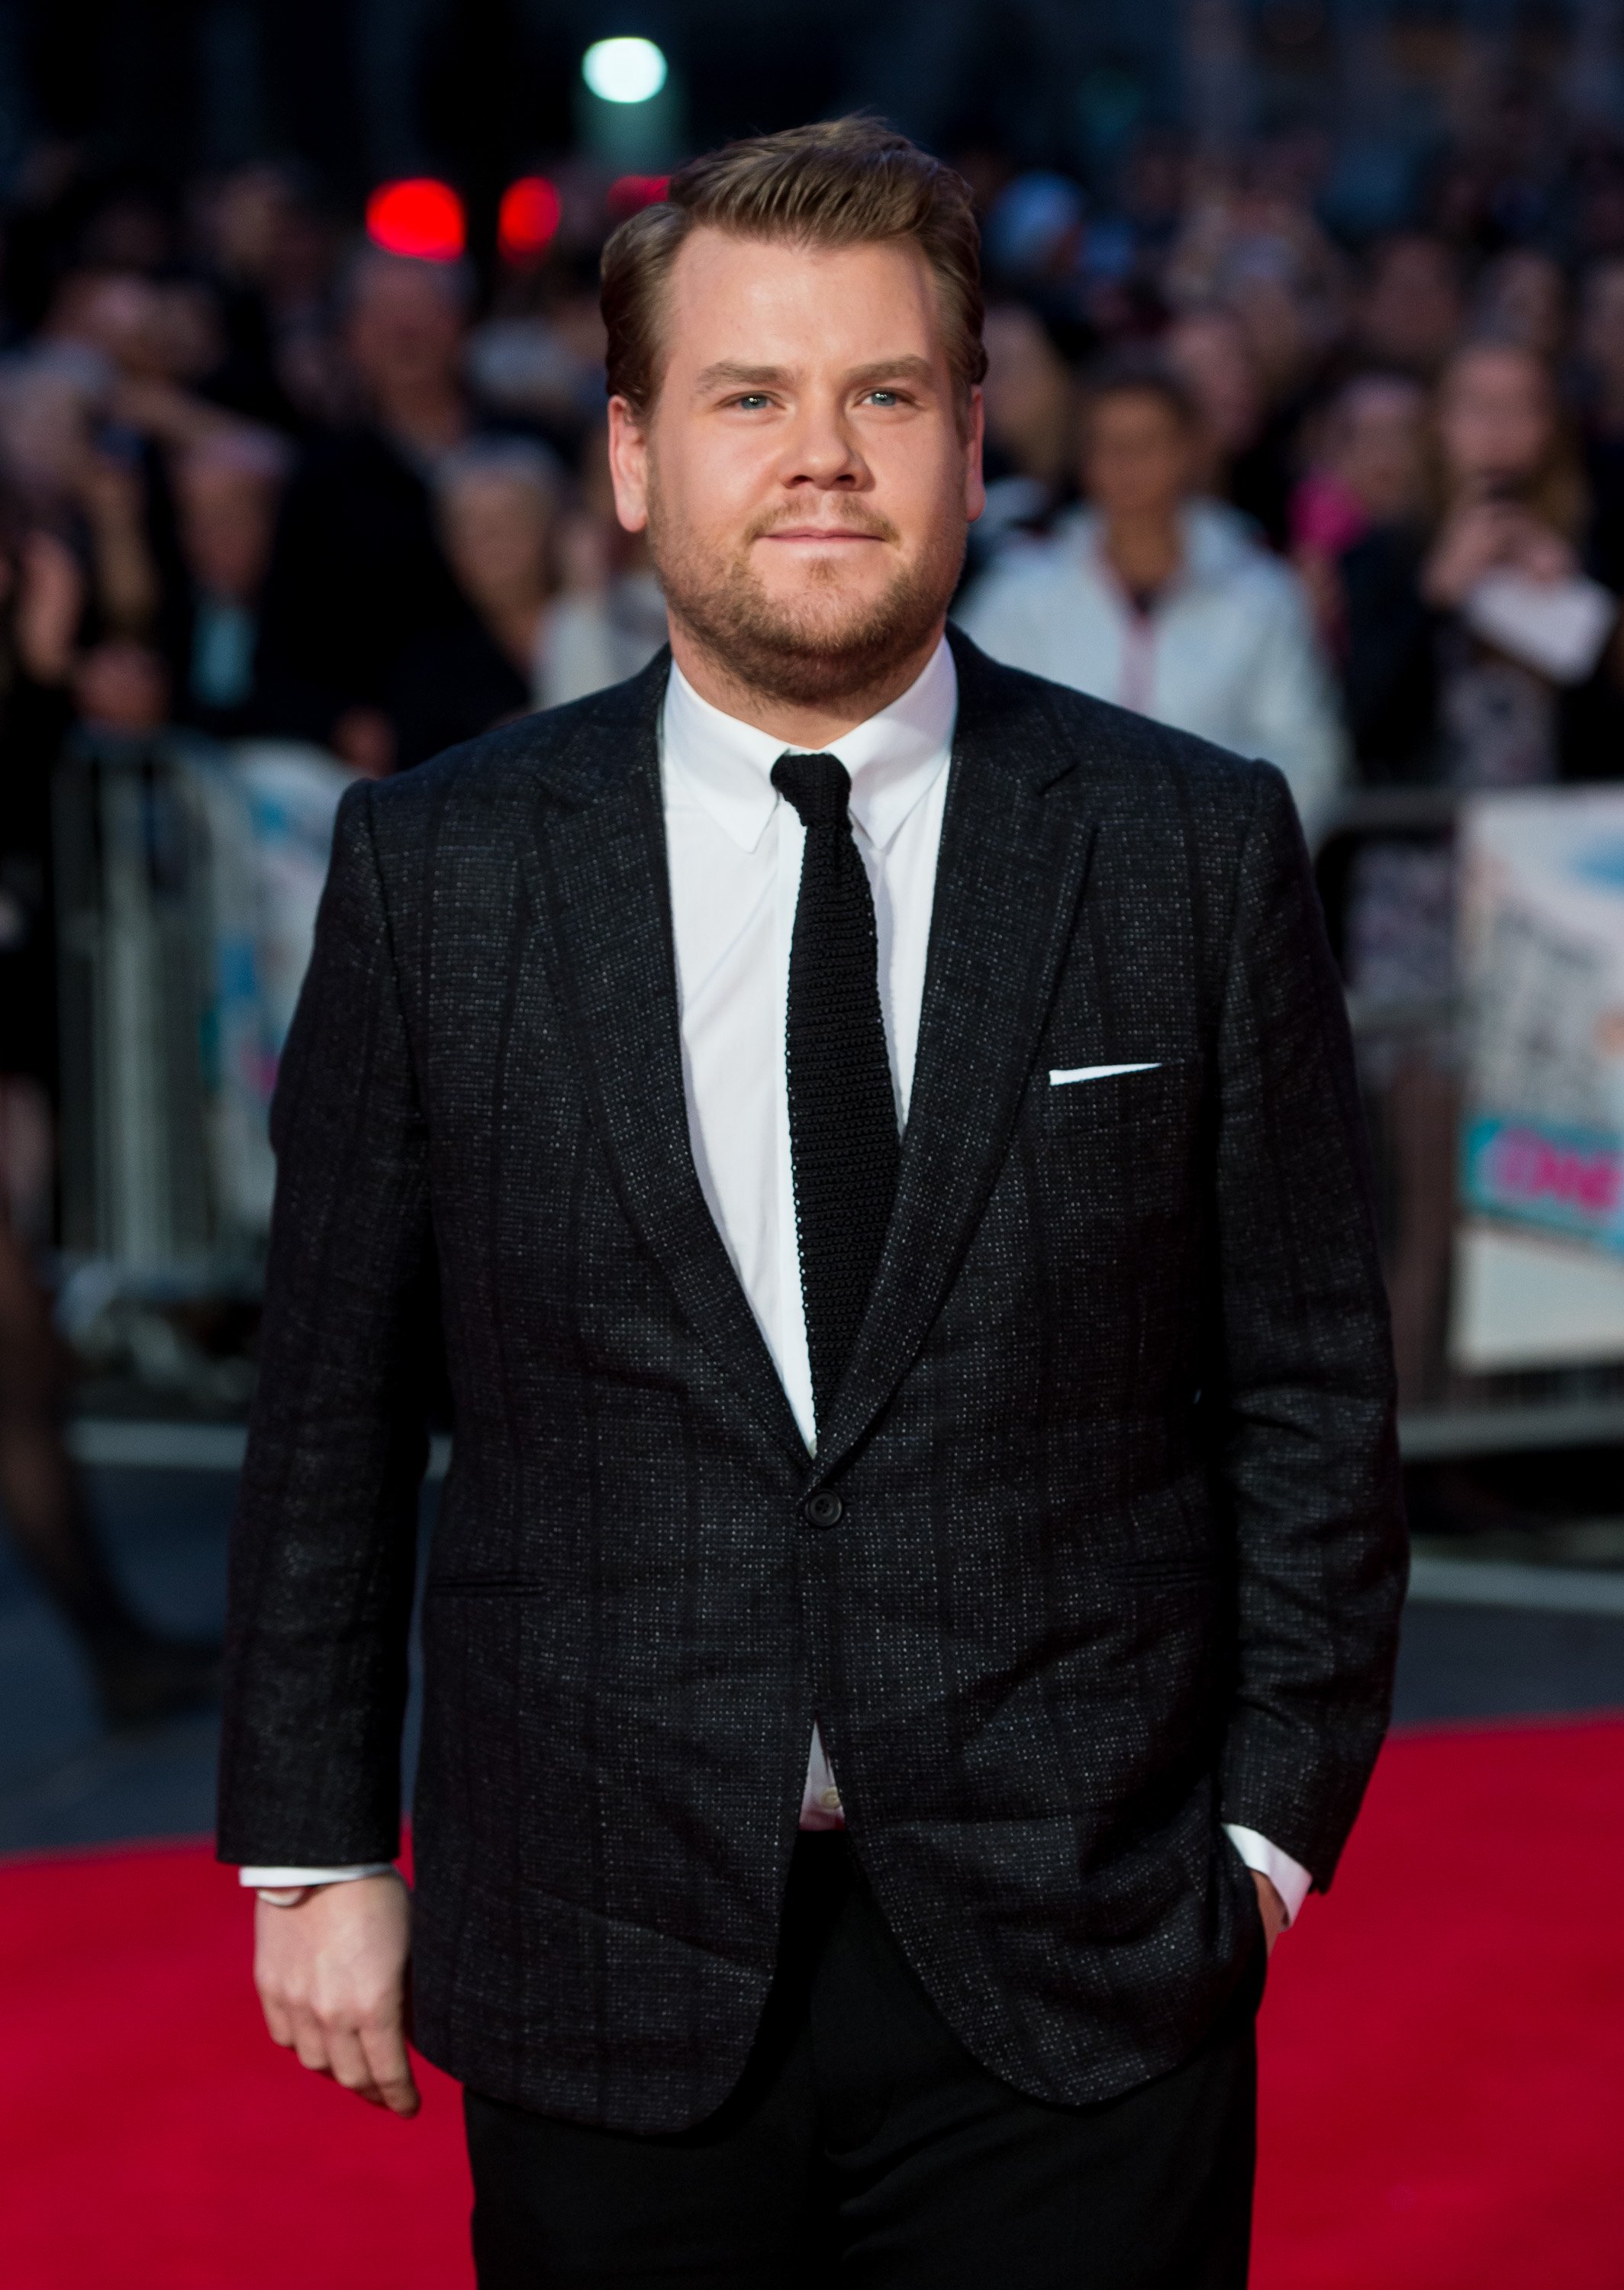 James Corden attends the premiere of "One Chance" on October 17, 2013 | Photo: Getty Images